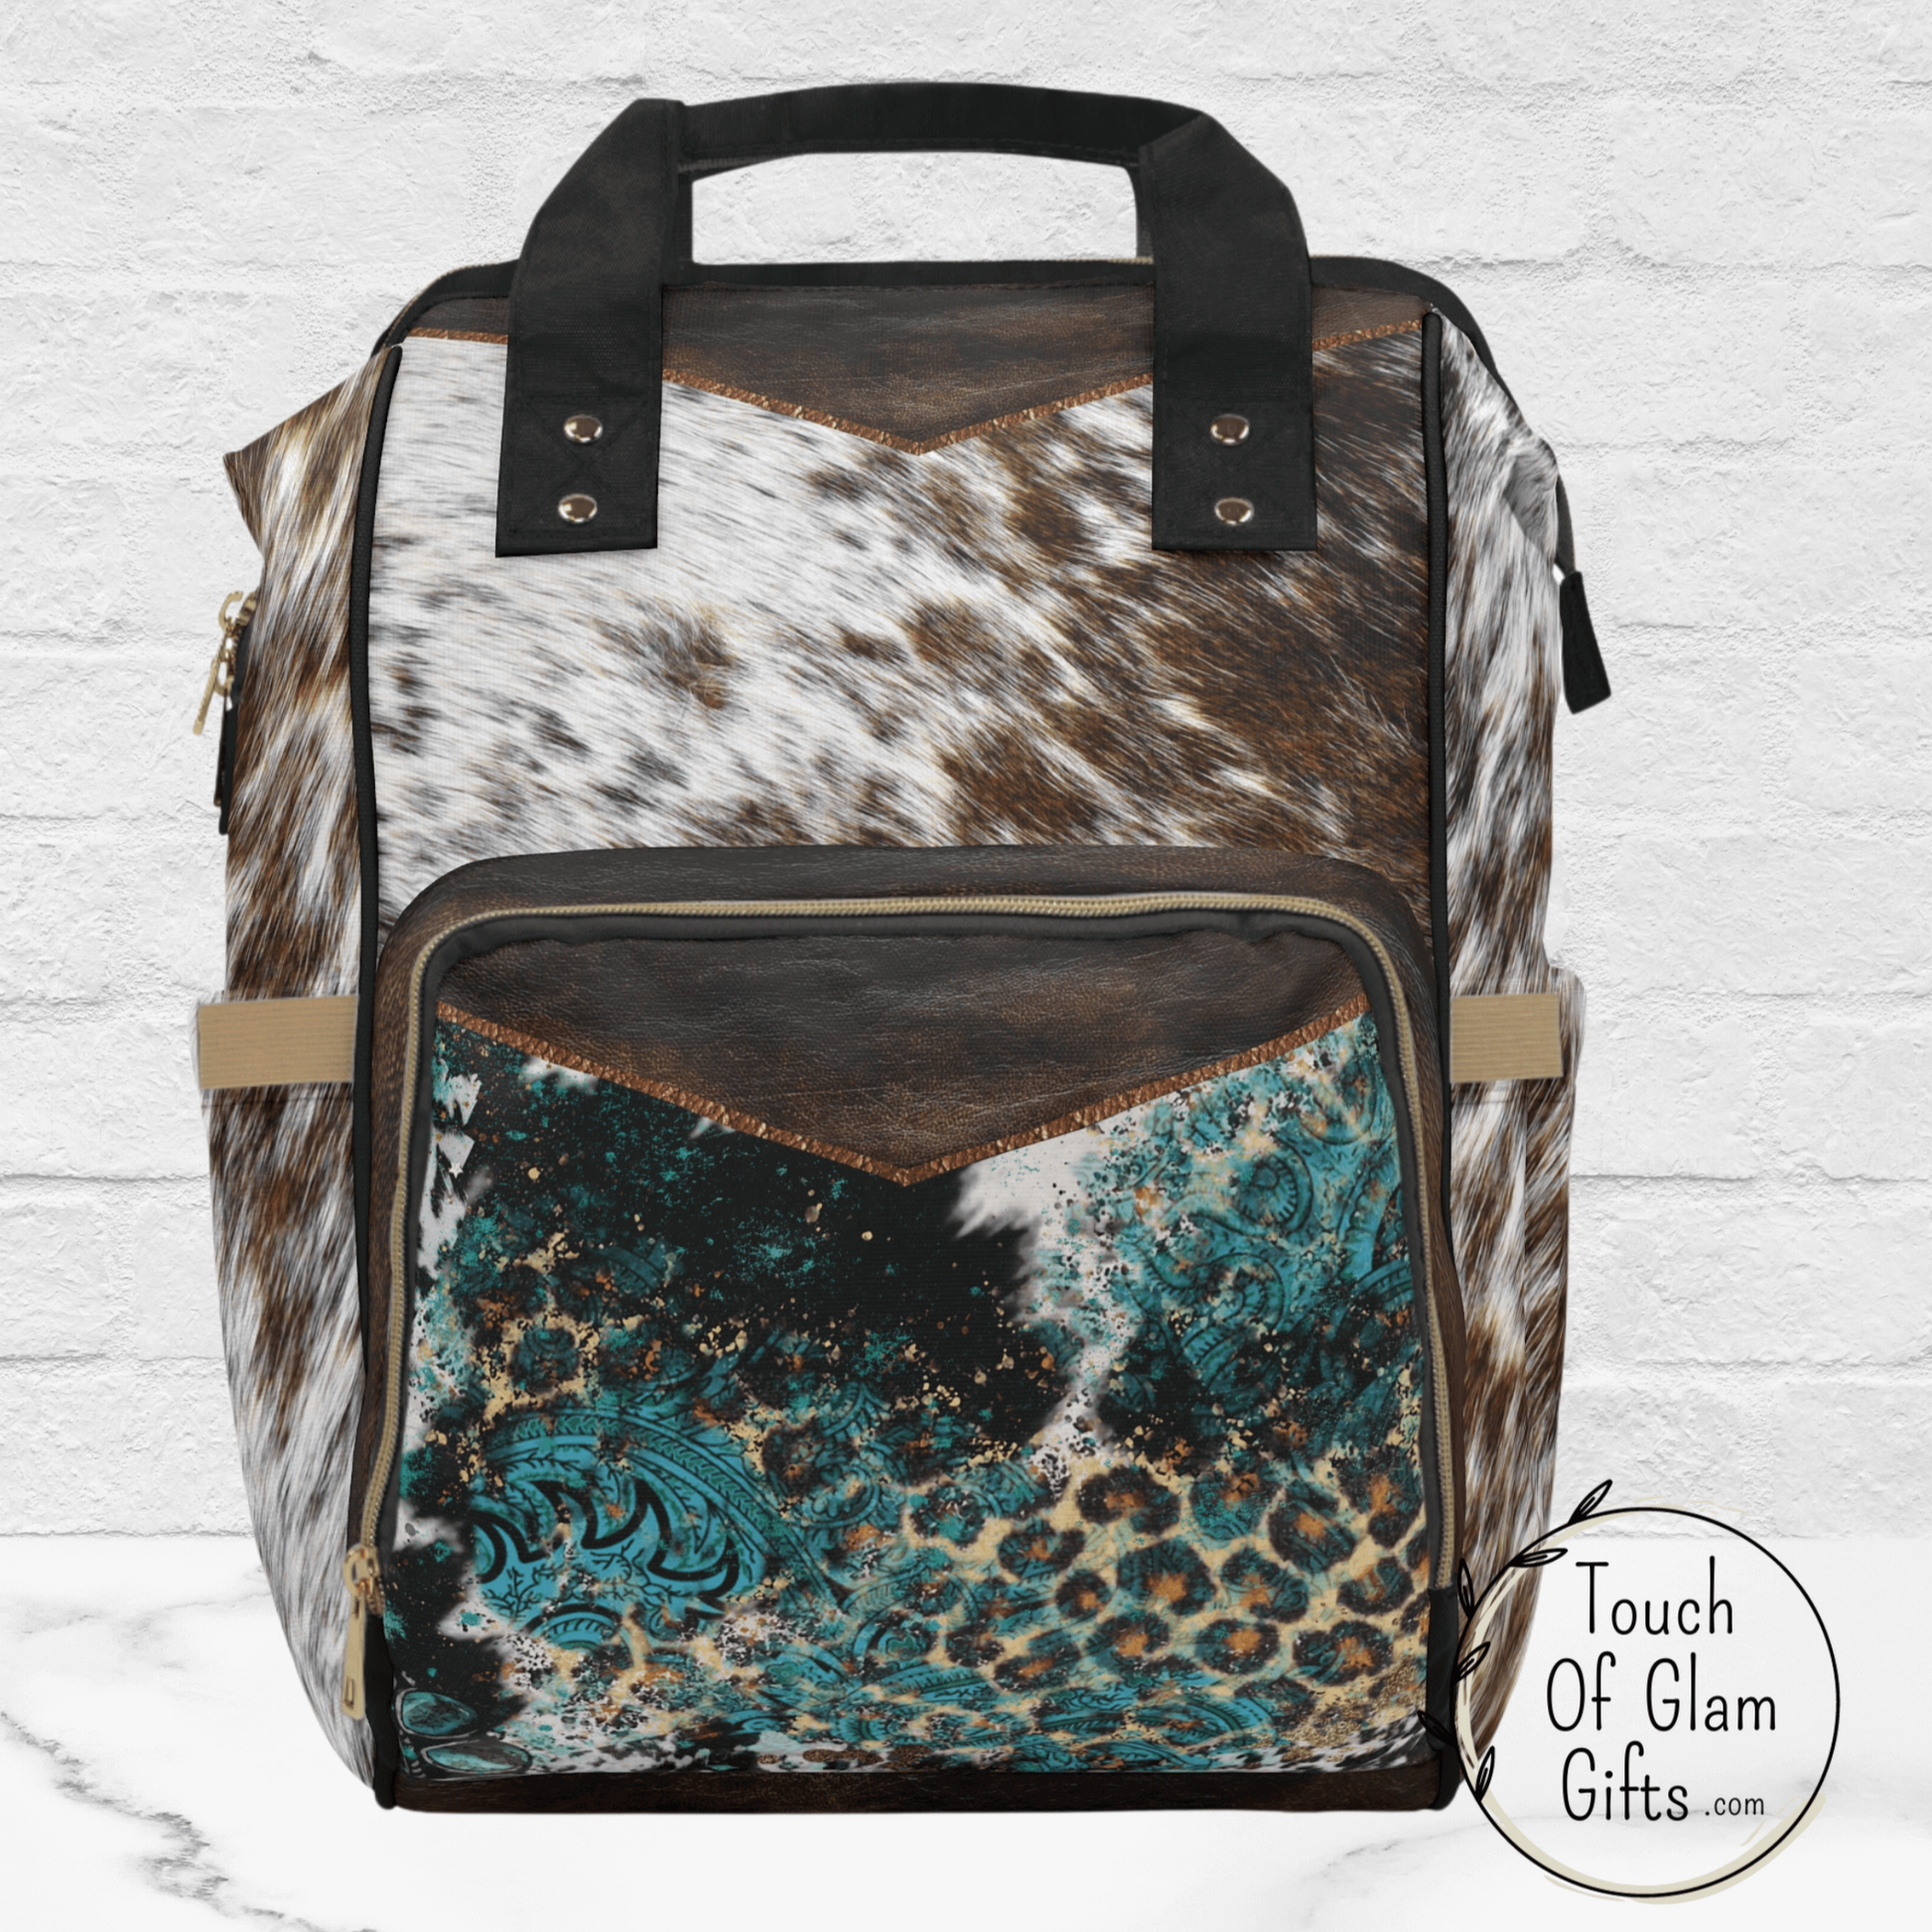 Our western style backpack can be customized or enjoyed plain, as shown here without monogramming. This cowhide print is highlighted with faux brown leather trim on the front and the base of the backpack.